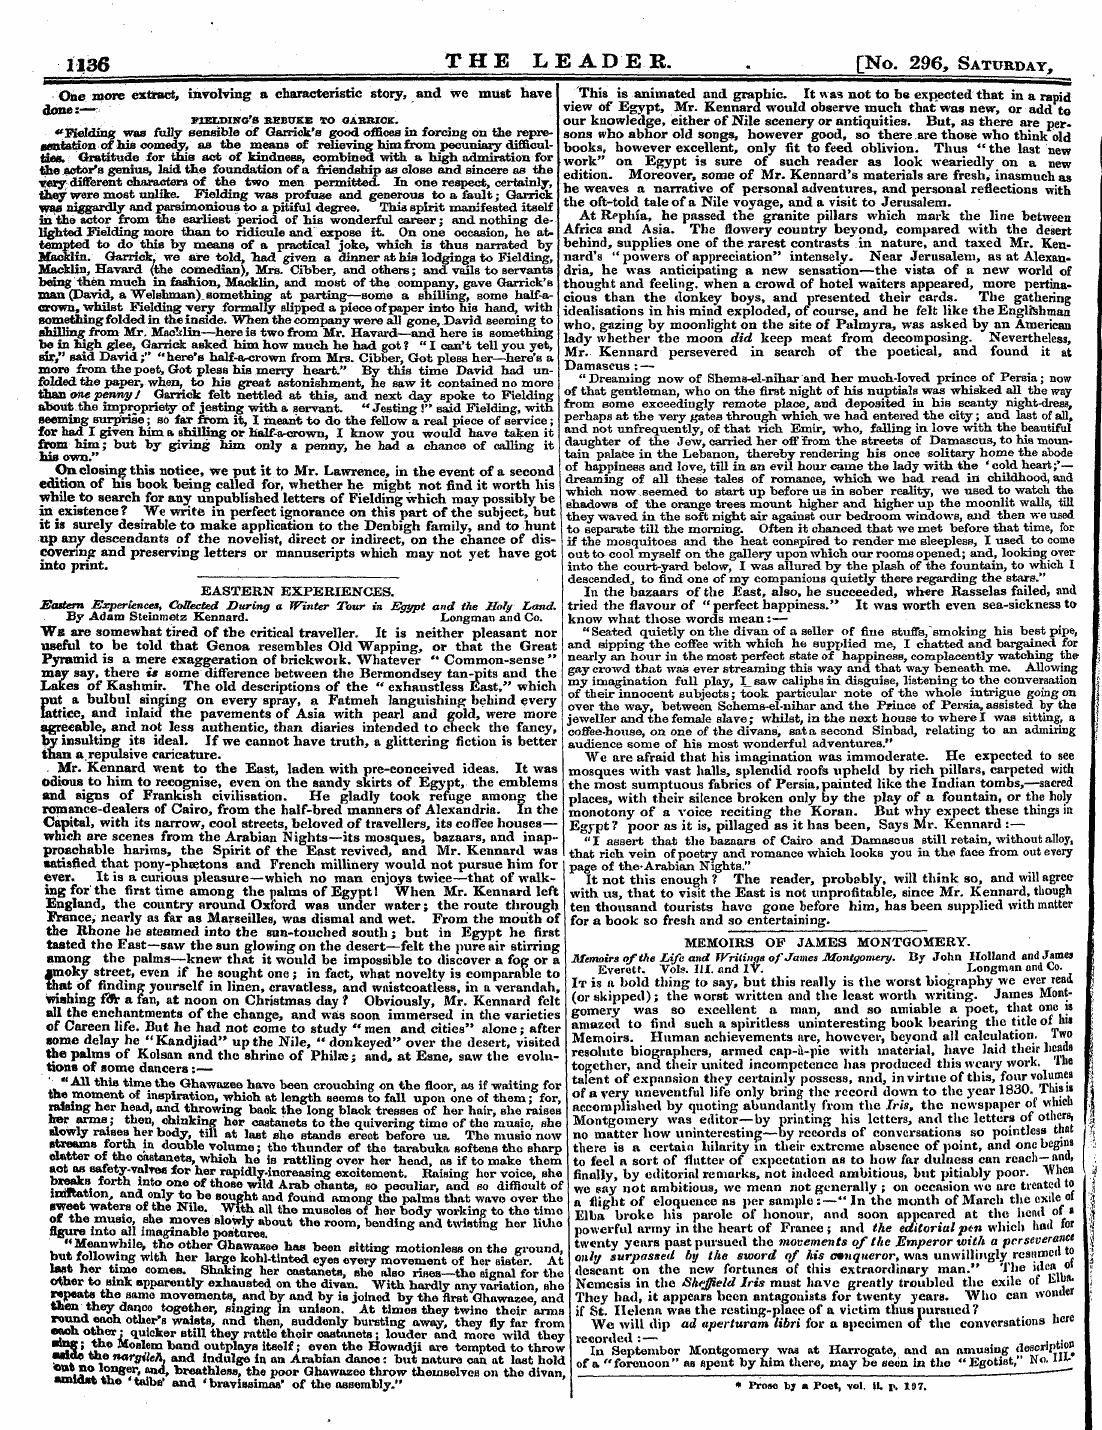 Leader (1850-1860): jS F Y, 2nd edition - 1136 The Leader. . [No. 296, Saturday,